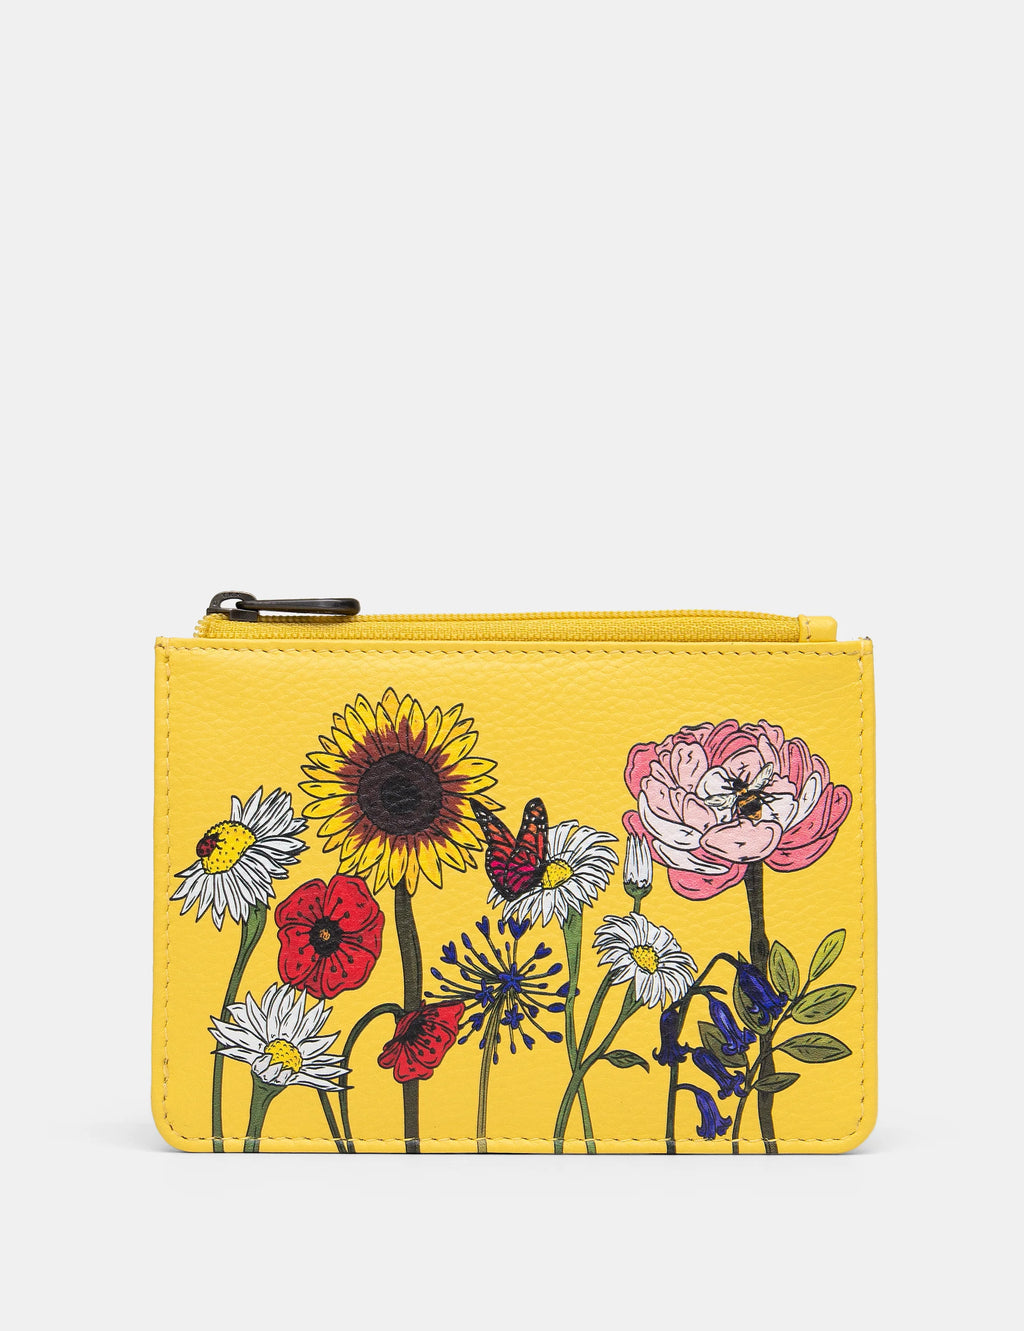 *NEW IN* Yoshi - Wildflower Zip Top Purse with RFID